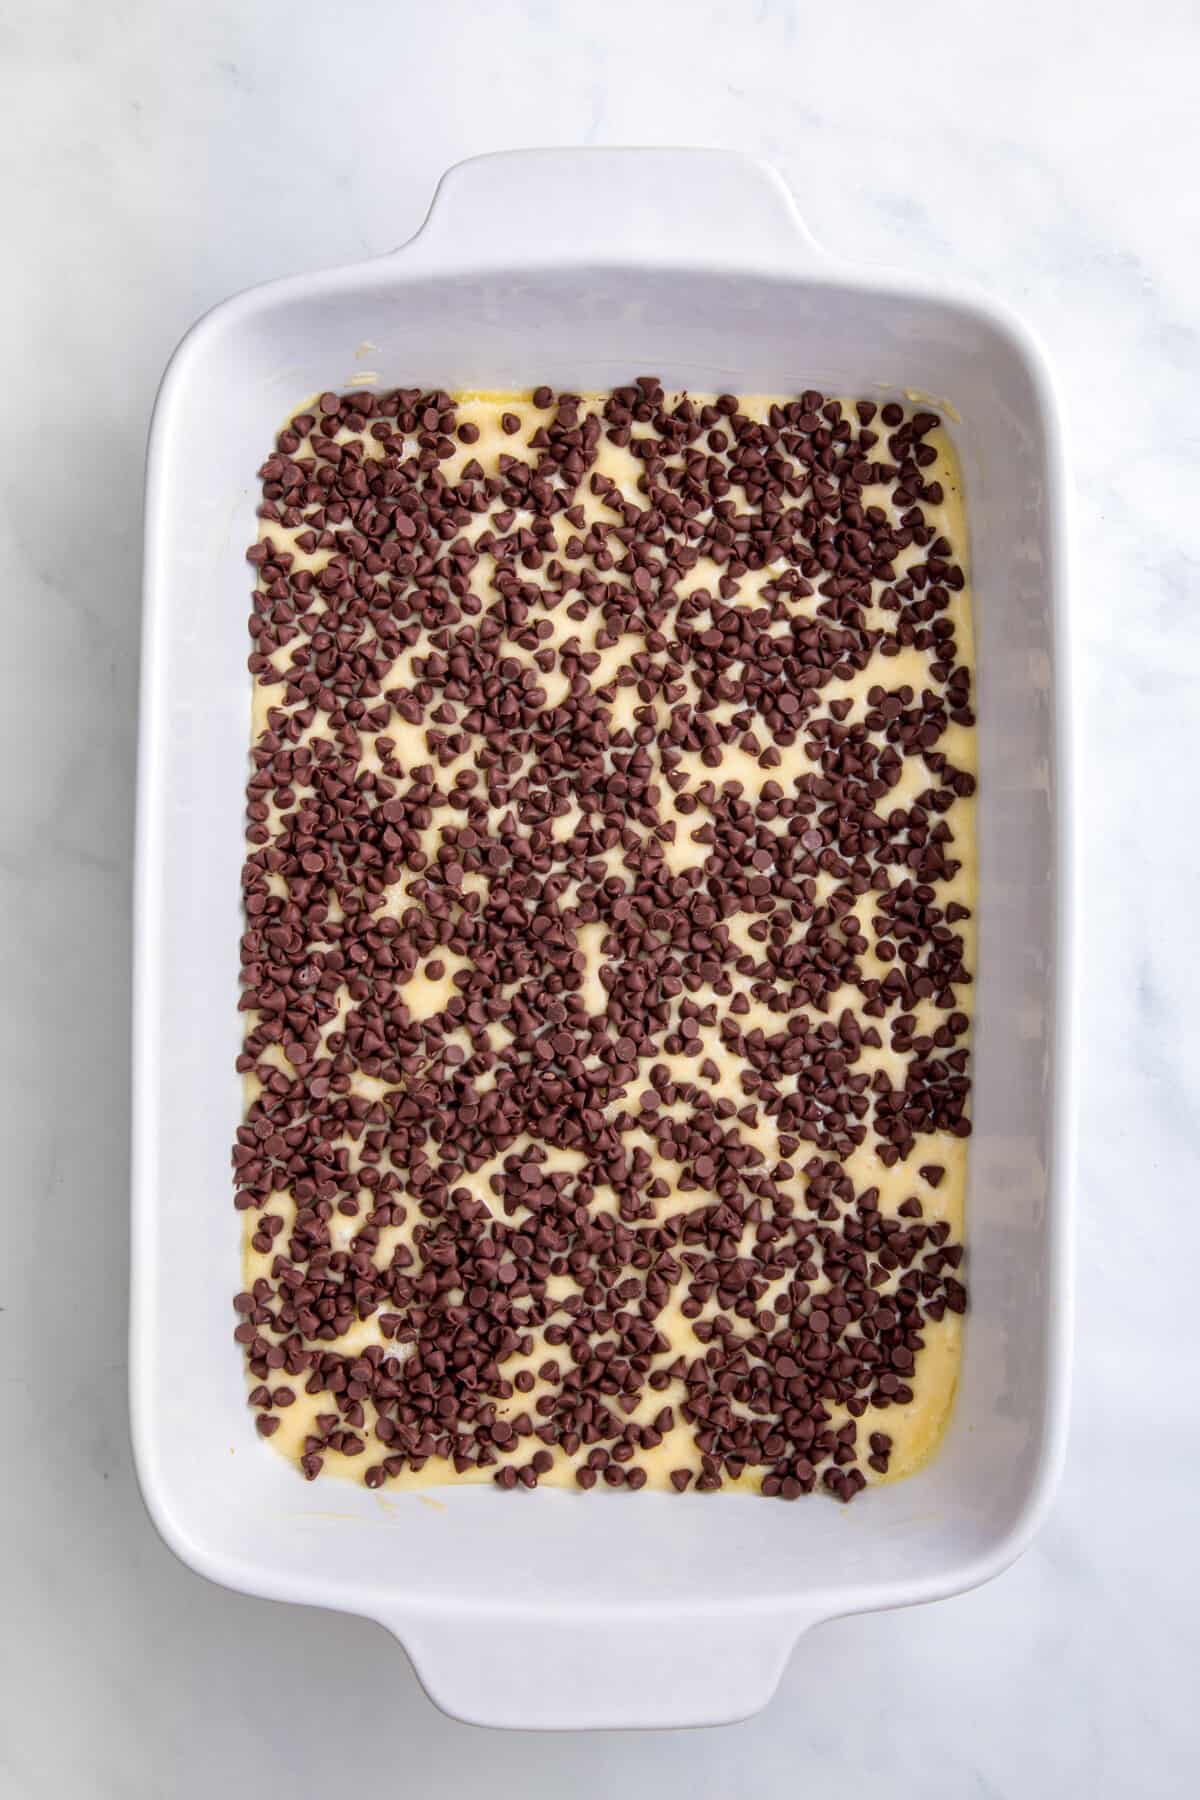 cake batter topped with chocolate chips in a 9x13 baking dish.